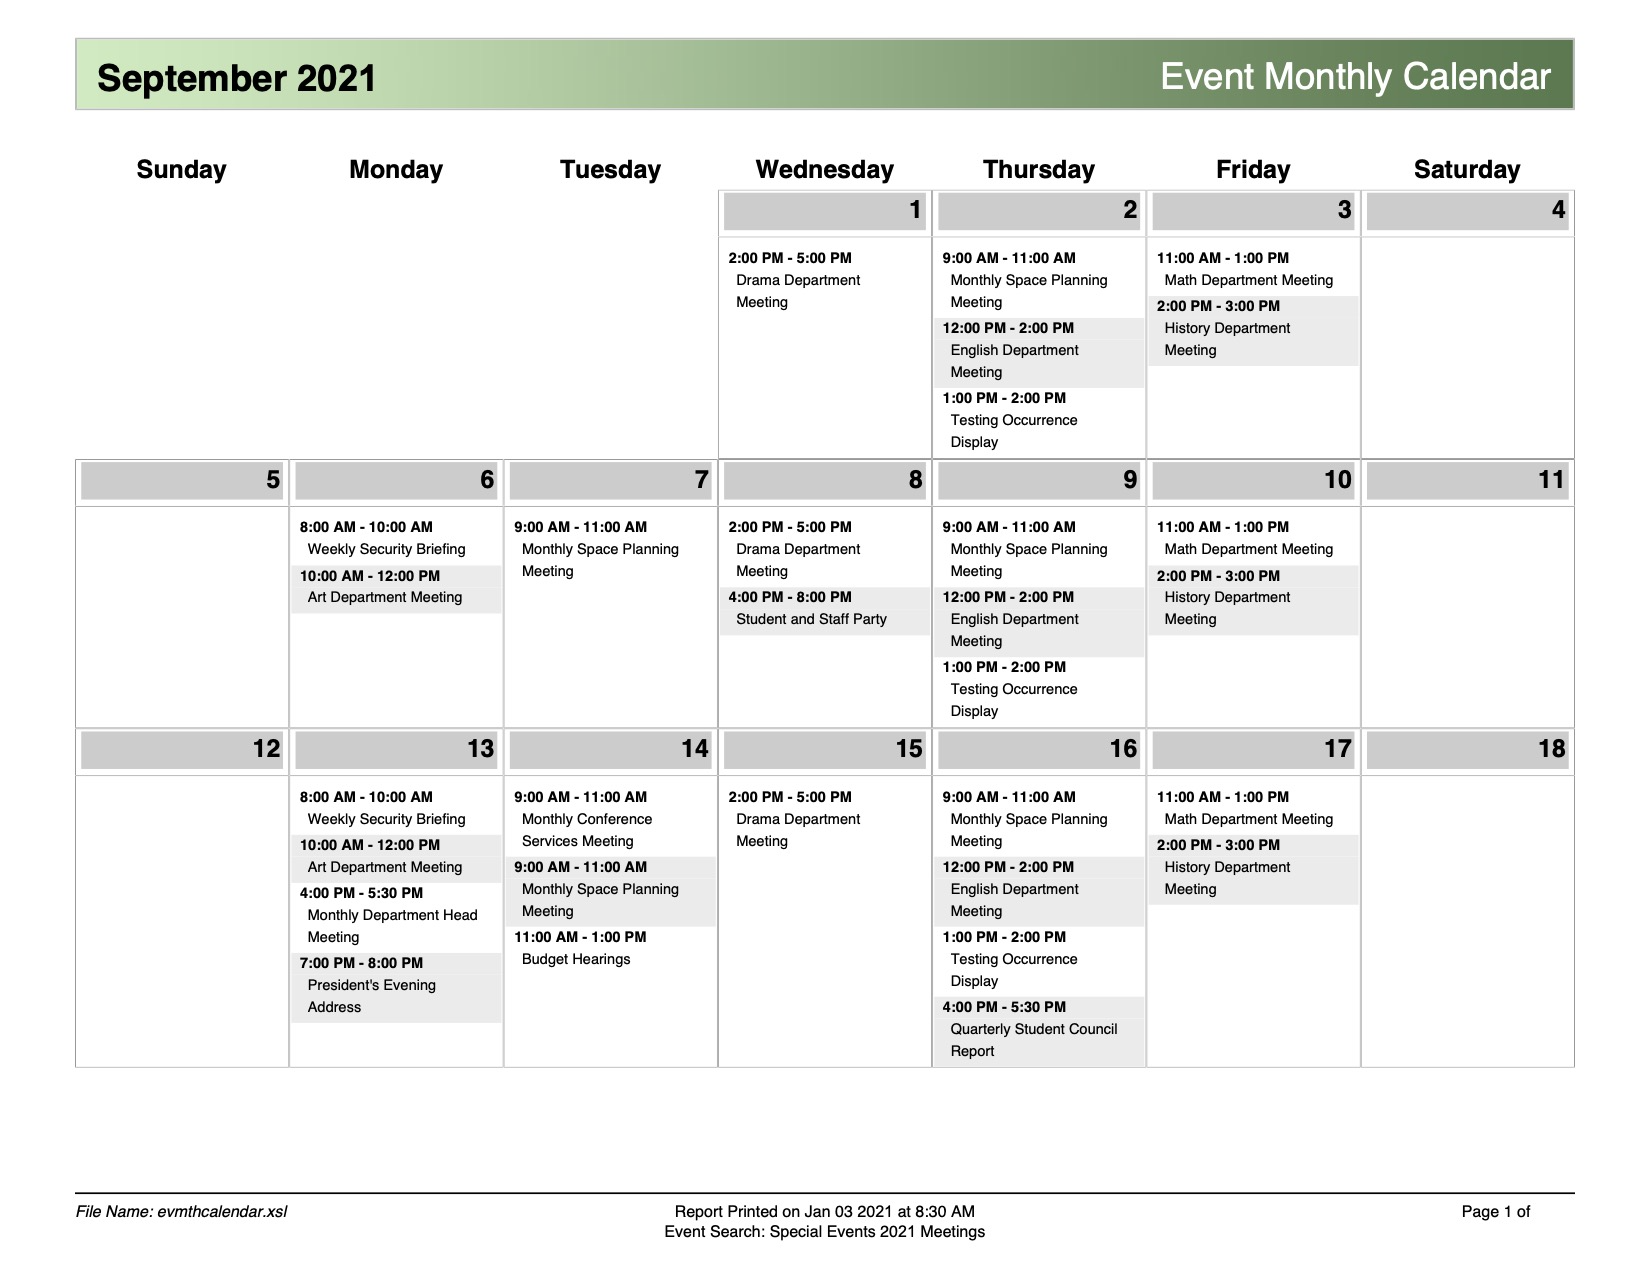 Event monthly calendar example